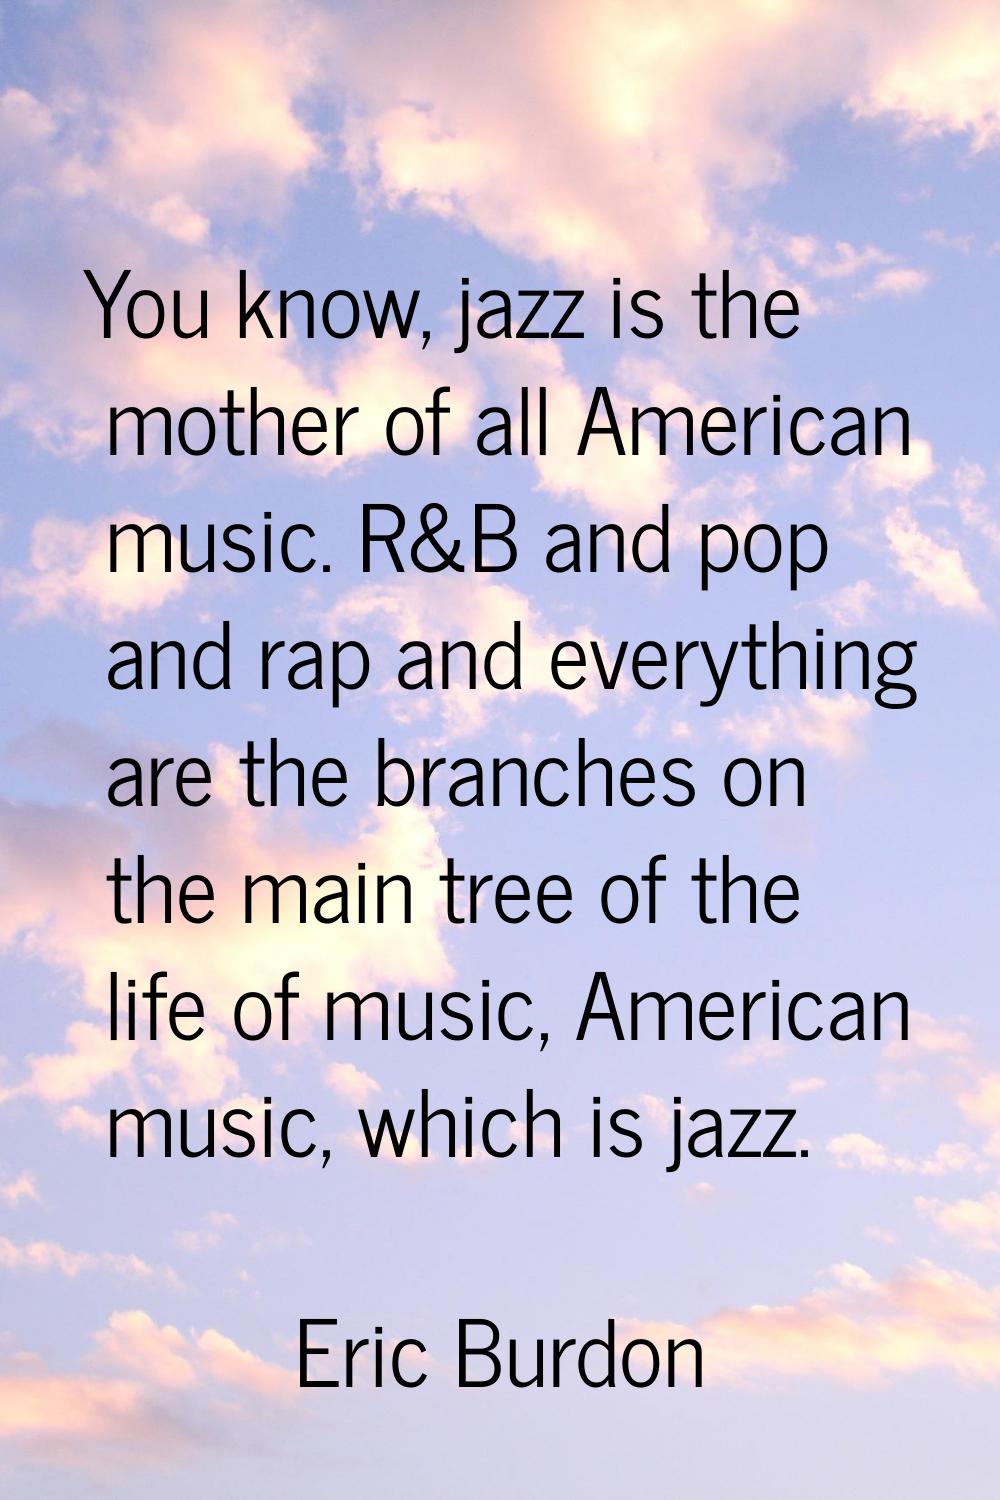 You know, jazz is the mother of all American music. R&B and pop and rap and everything are the bran